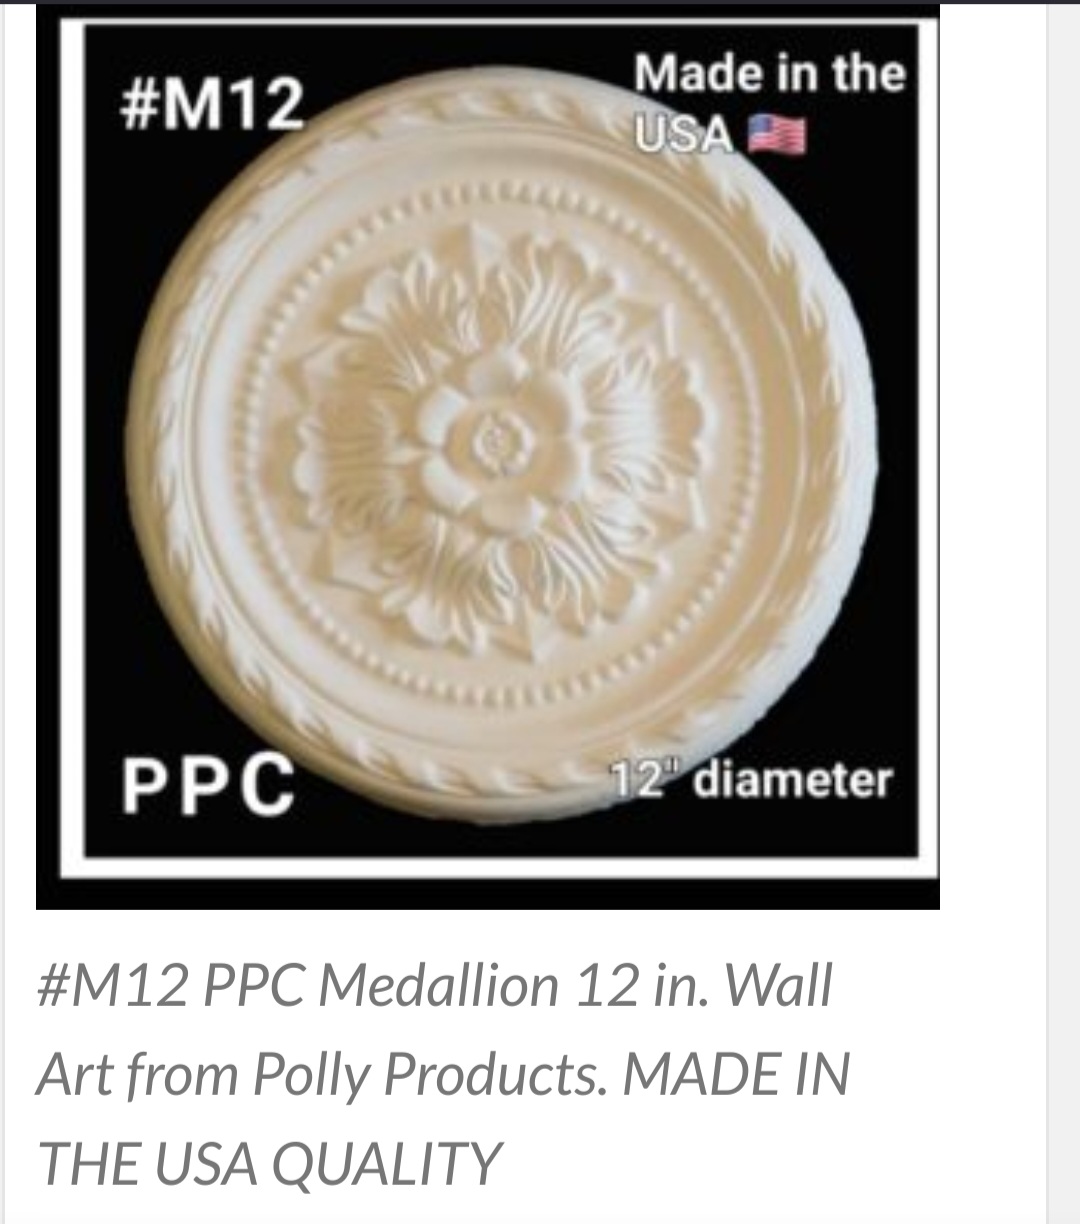 #M12, 12" DIAMETER MEDALLION/WALLART FROM POLLY PRODUCTS COMPANY. MADE IN THE USA QUALITY PRODUCTS SINCE 1976.